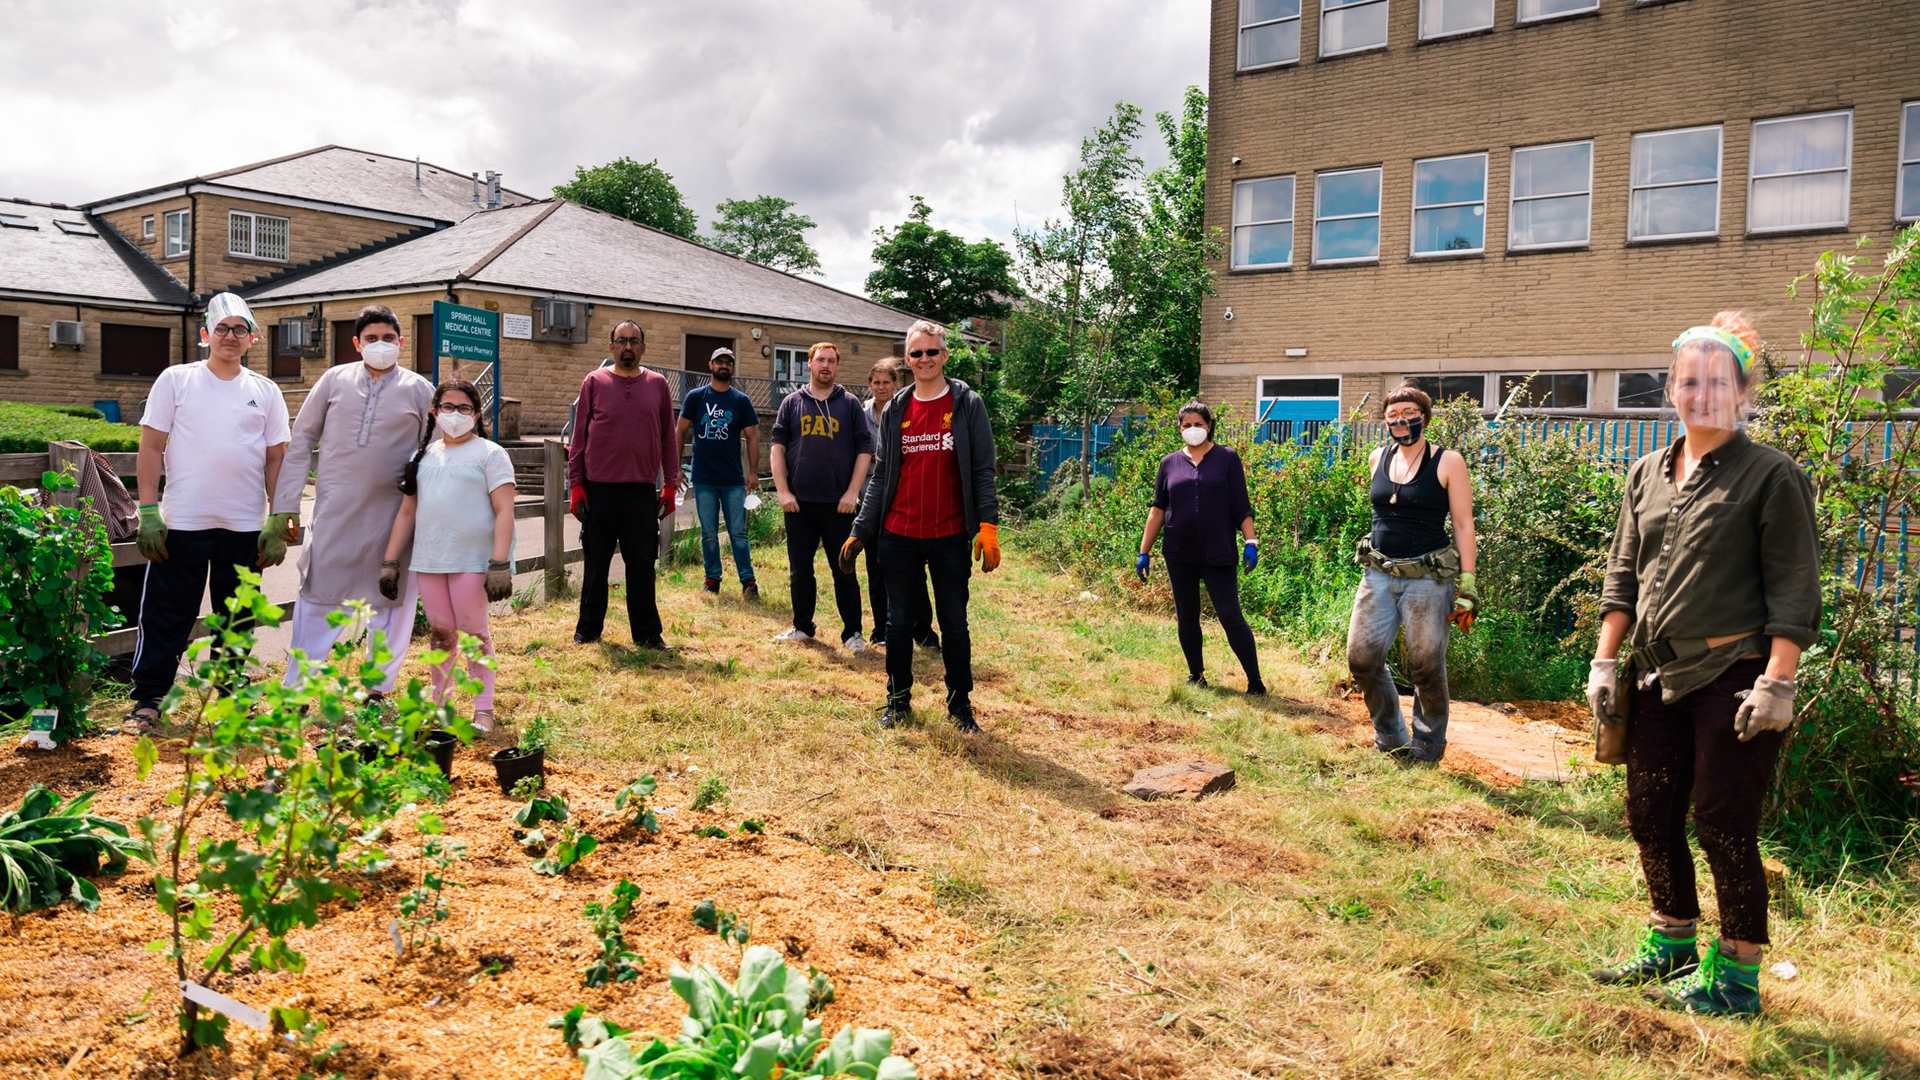 Group of people wearing masks and PPE standing at a distance from one and other in a community garden